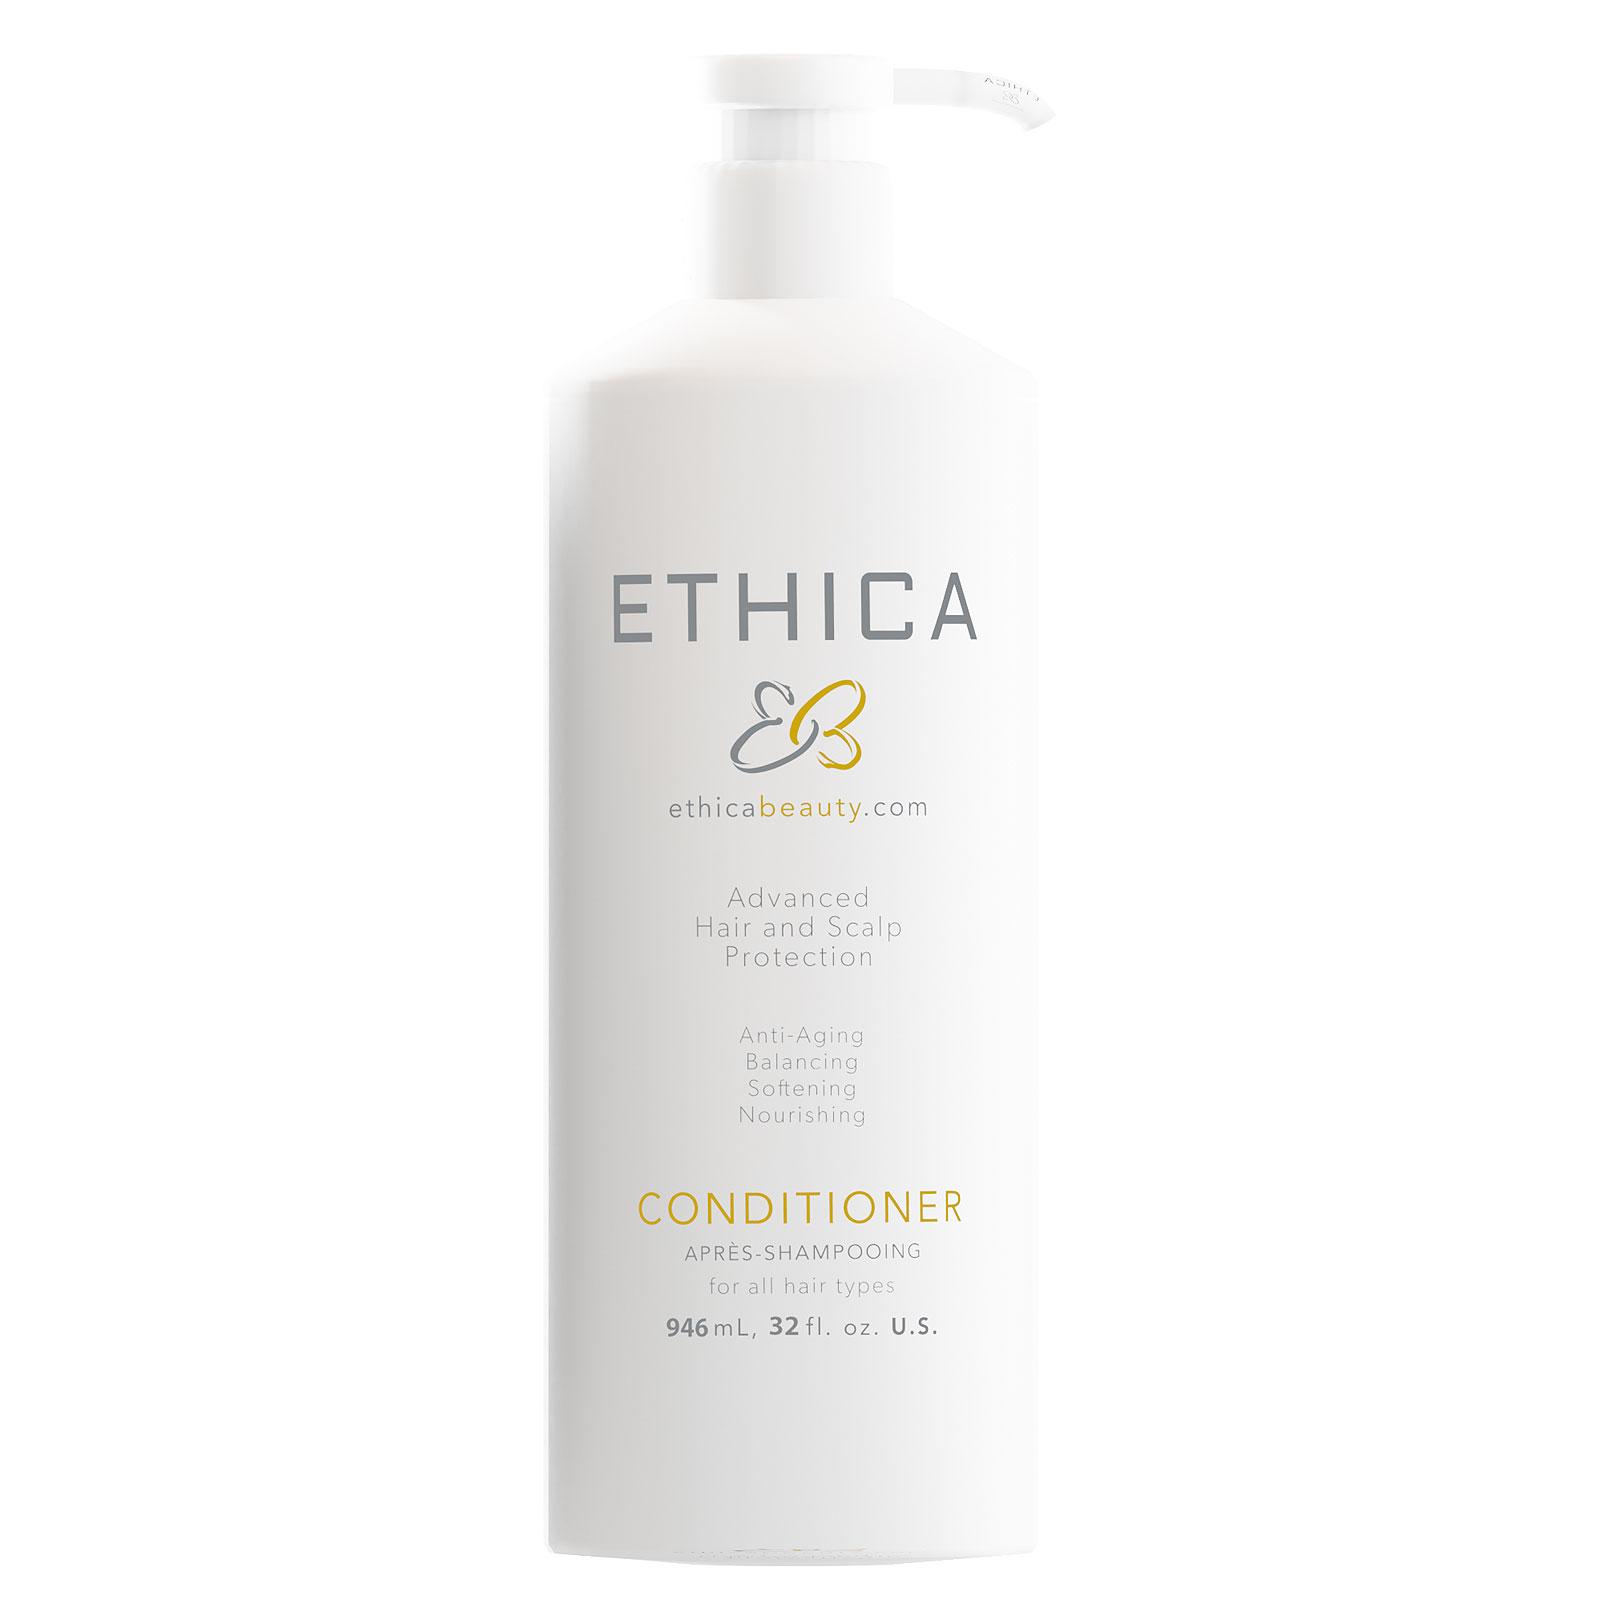 Ethica Daily Conditioner - Anti-Aging